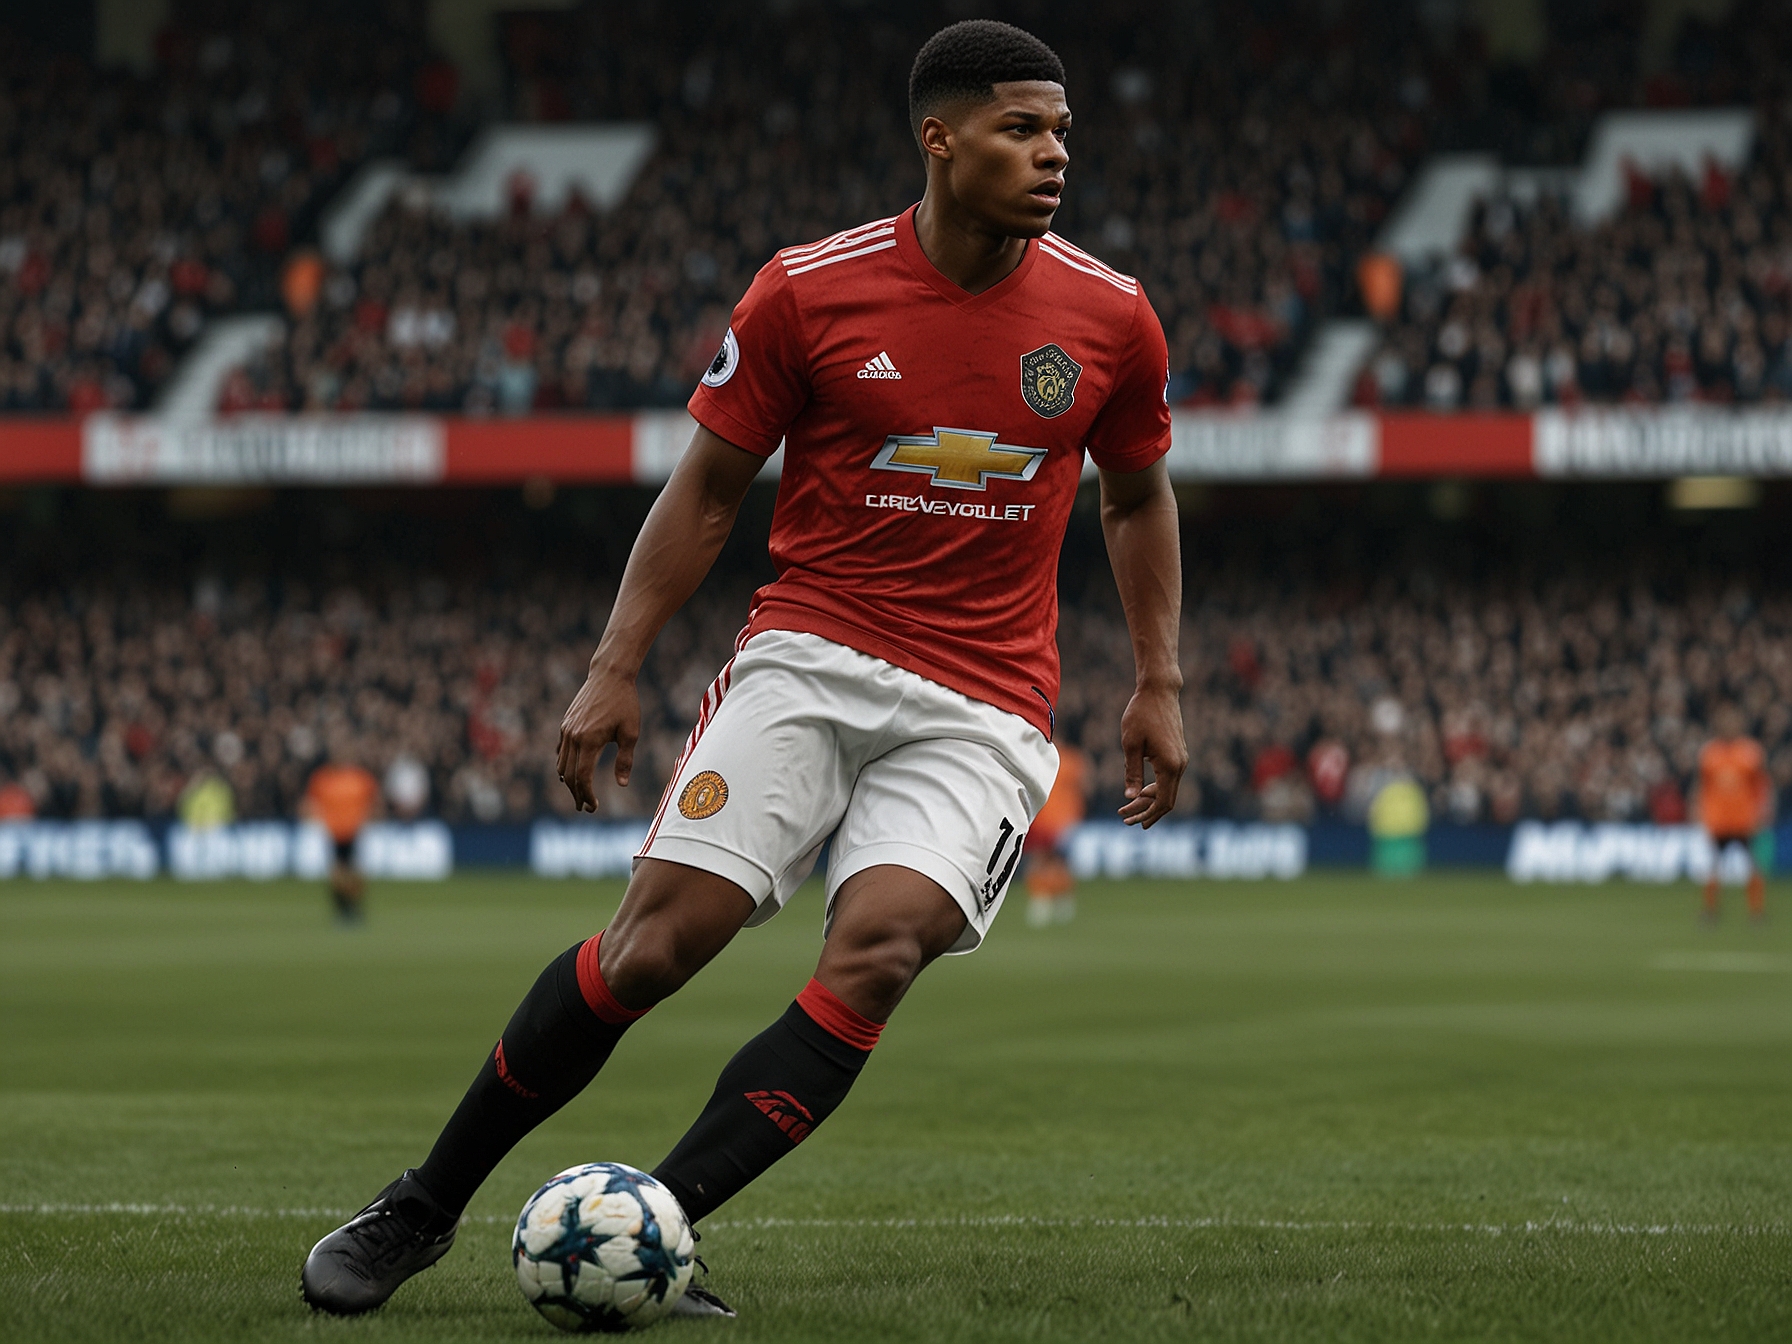 Marcus Rashford in Manchester United's kit during a Premier League match, showcasing his pace and agility as he navigates past defenders. His performance in such matches is crucial to his future at the club.